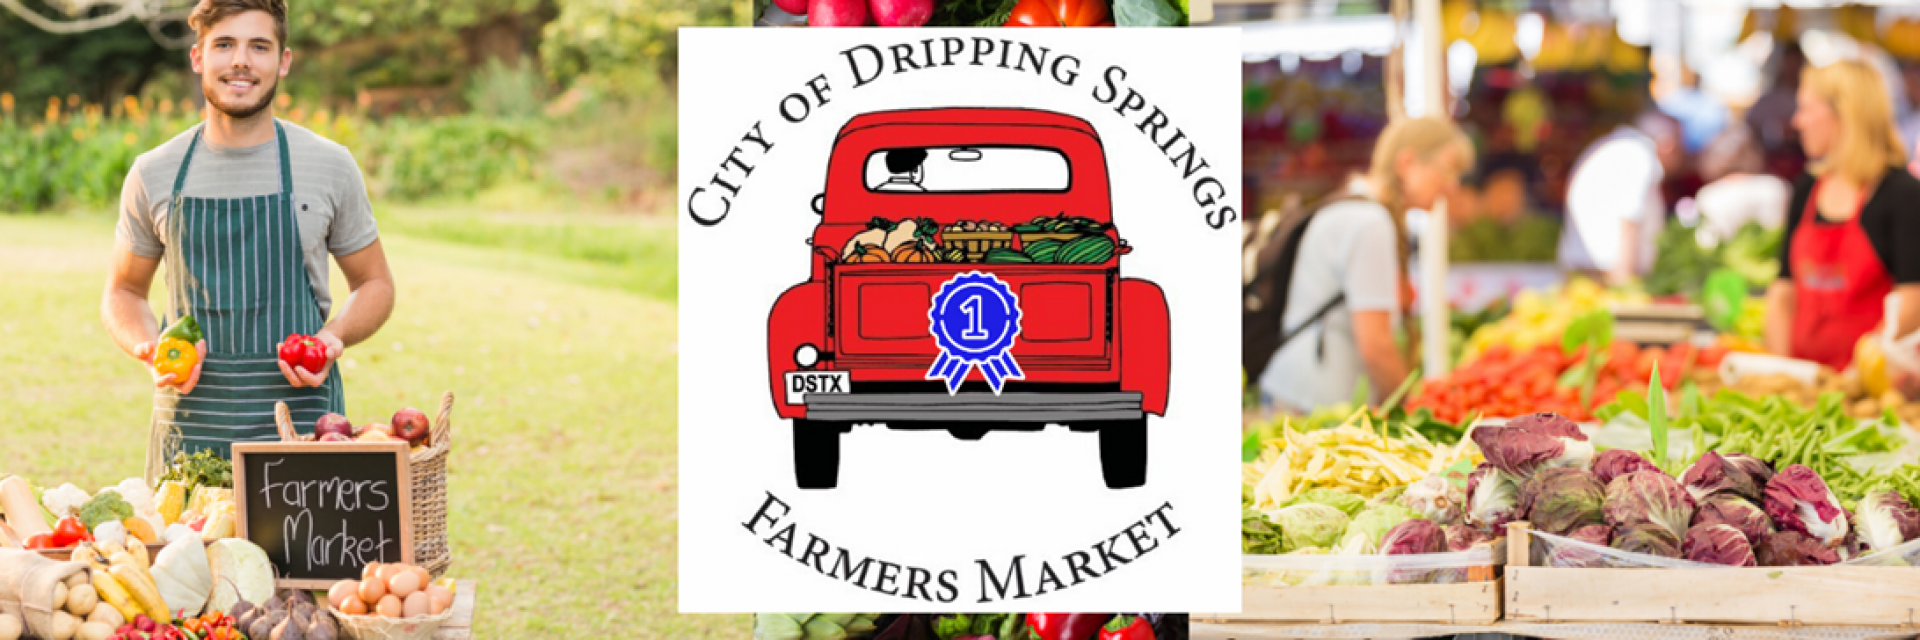 City of Dripping Springs Farmers Market